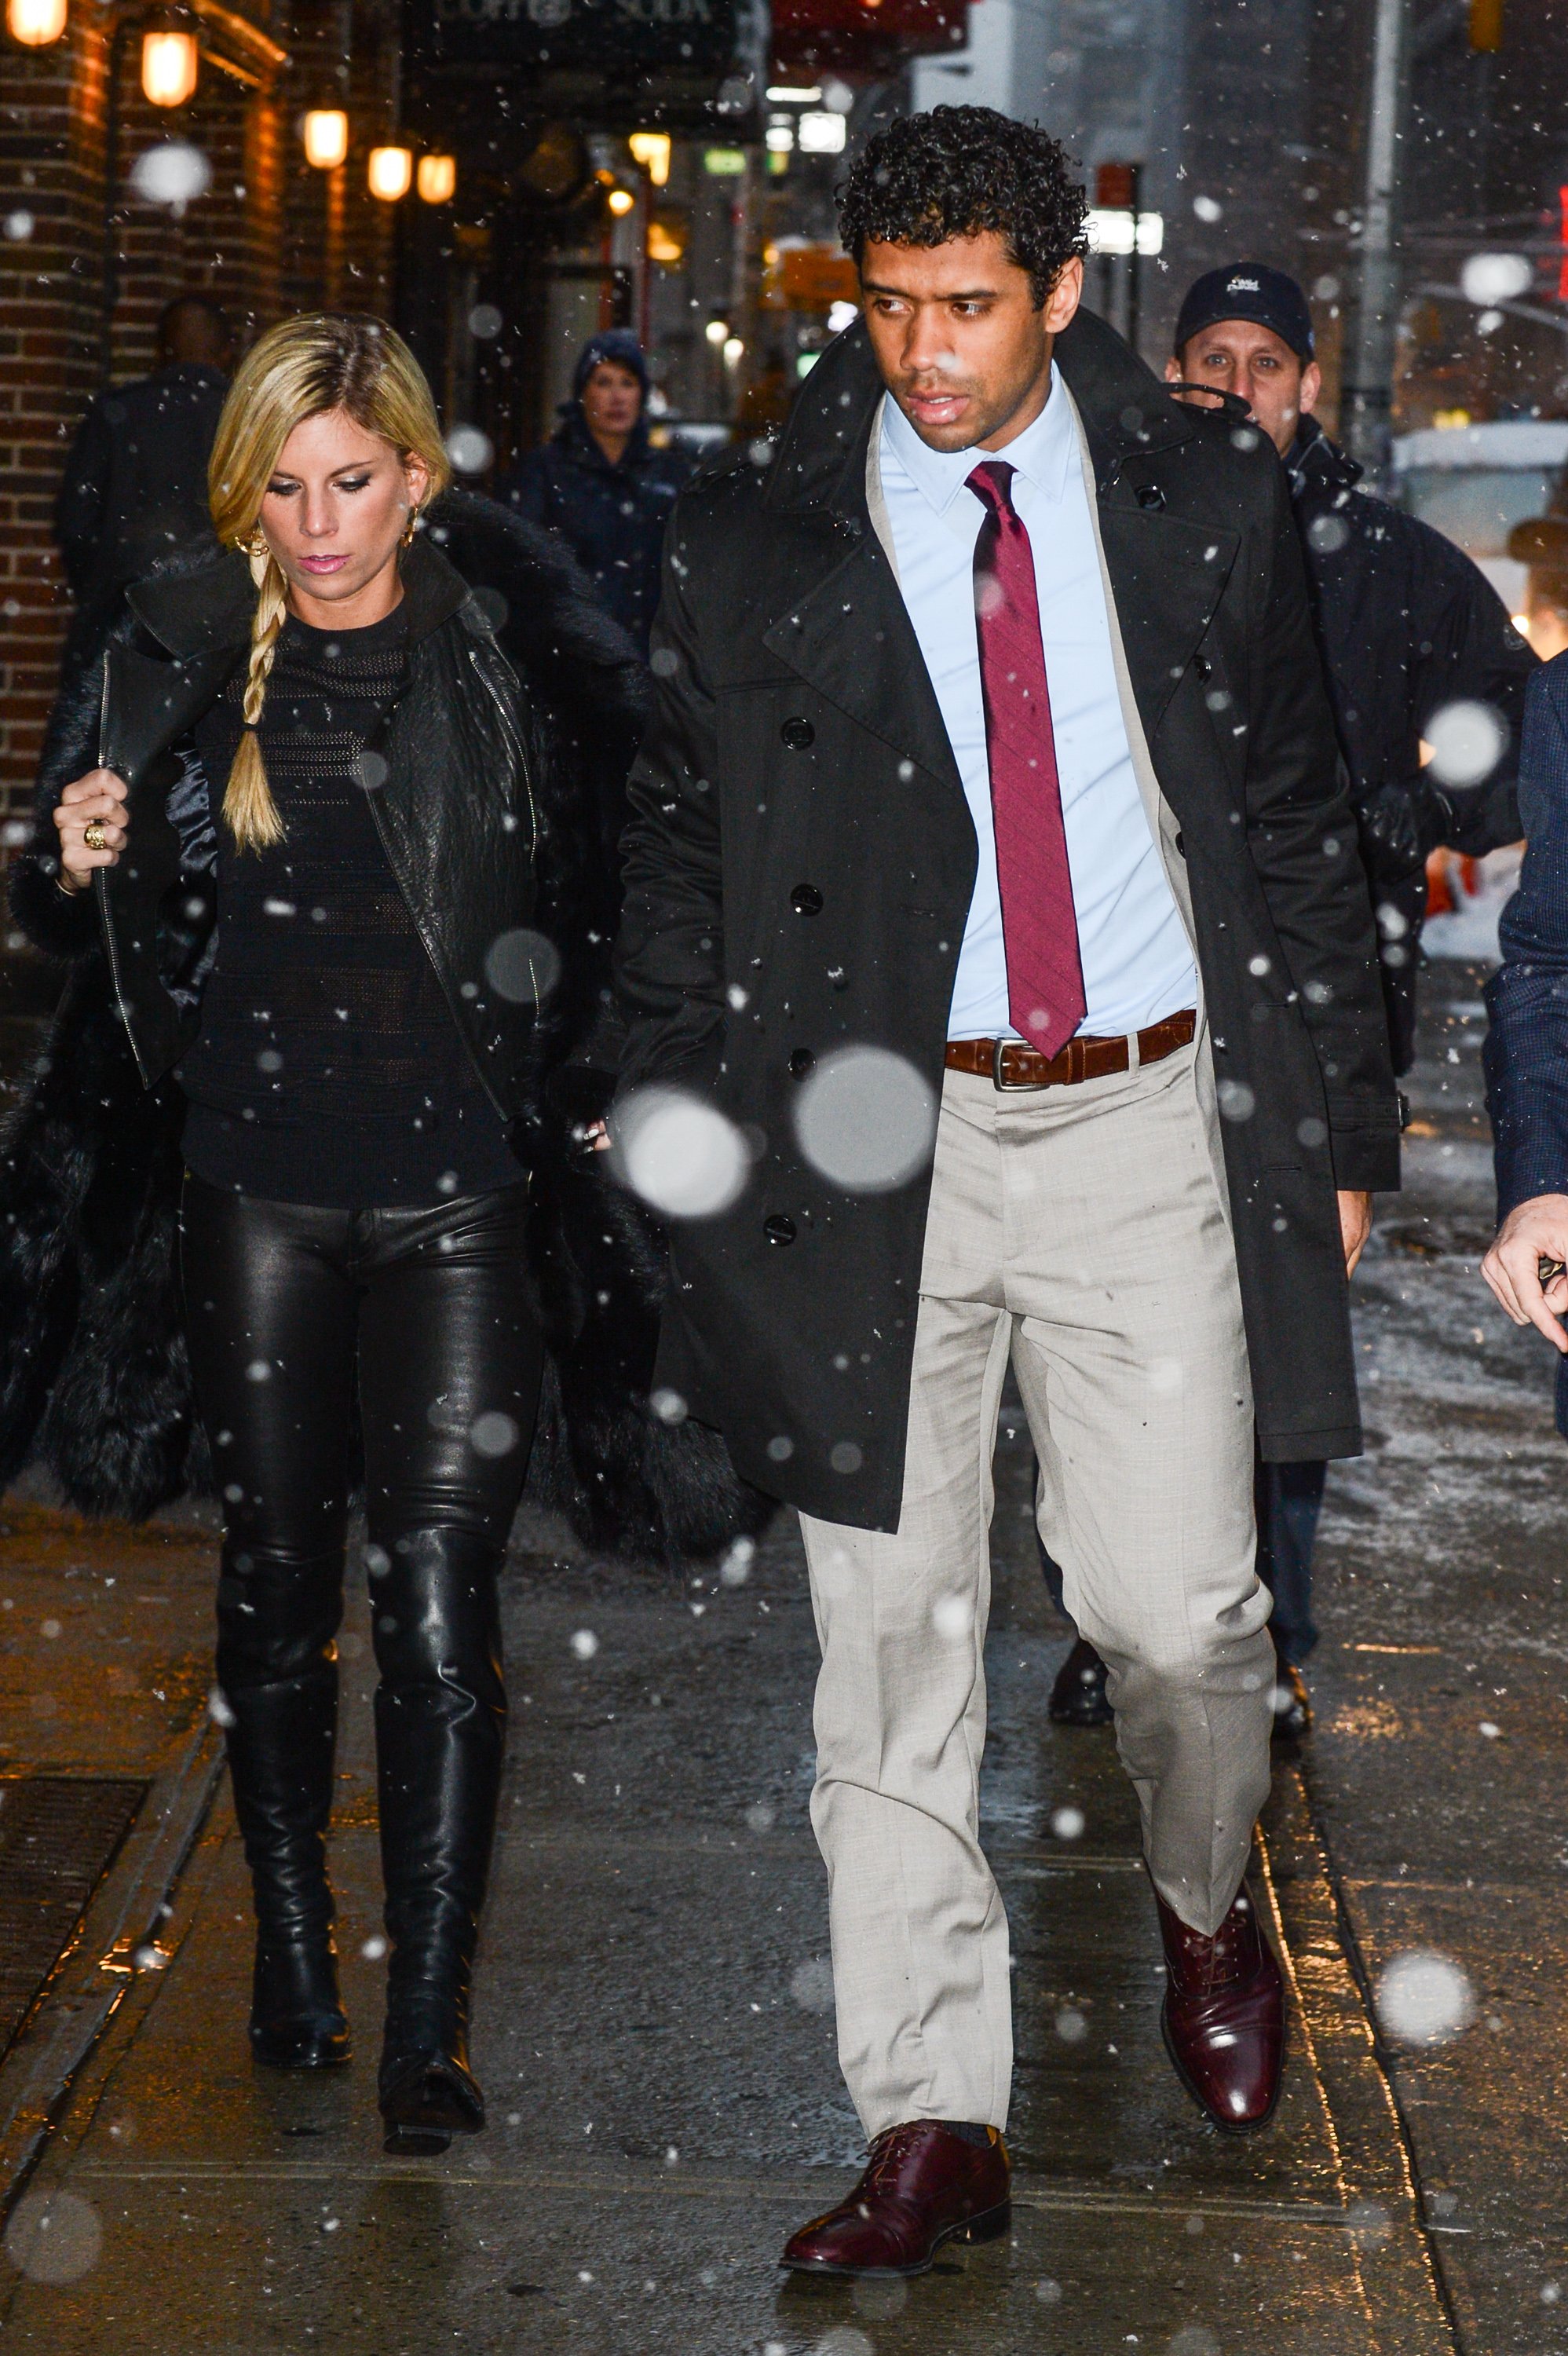 Russell Wilson and his ex-wife, Ashton Meem, are photographed as they enter the Ed Sullivan Theater for the "Late Show With David Letterman" taping on February 3, 2014, in New York City. | Source: Getty Images